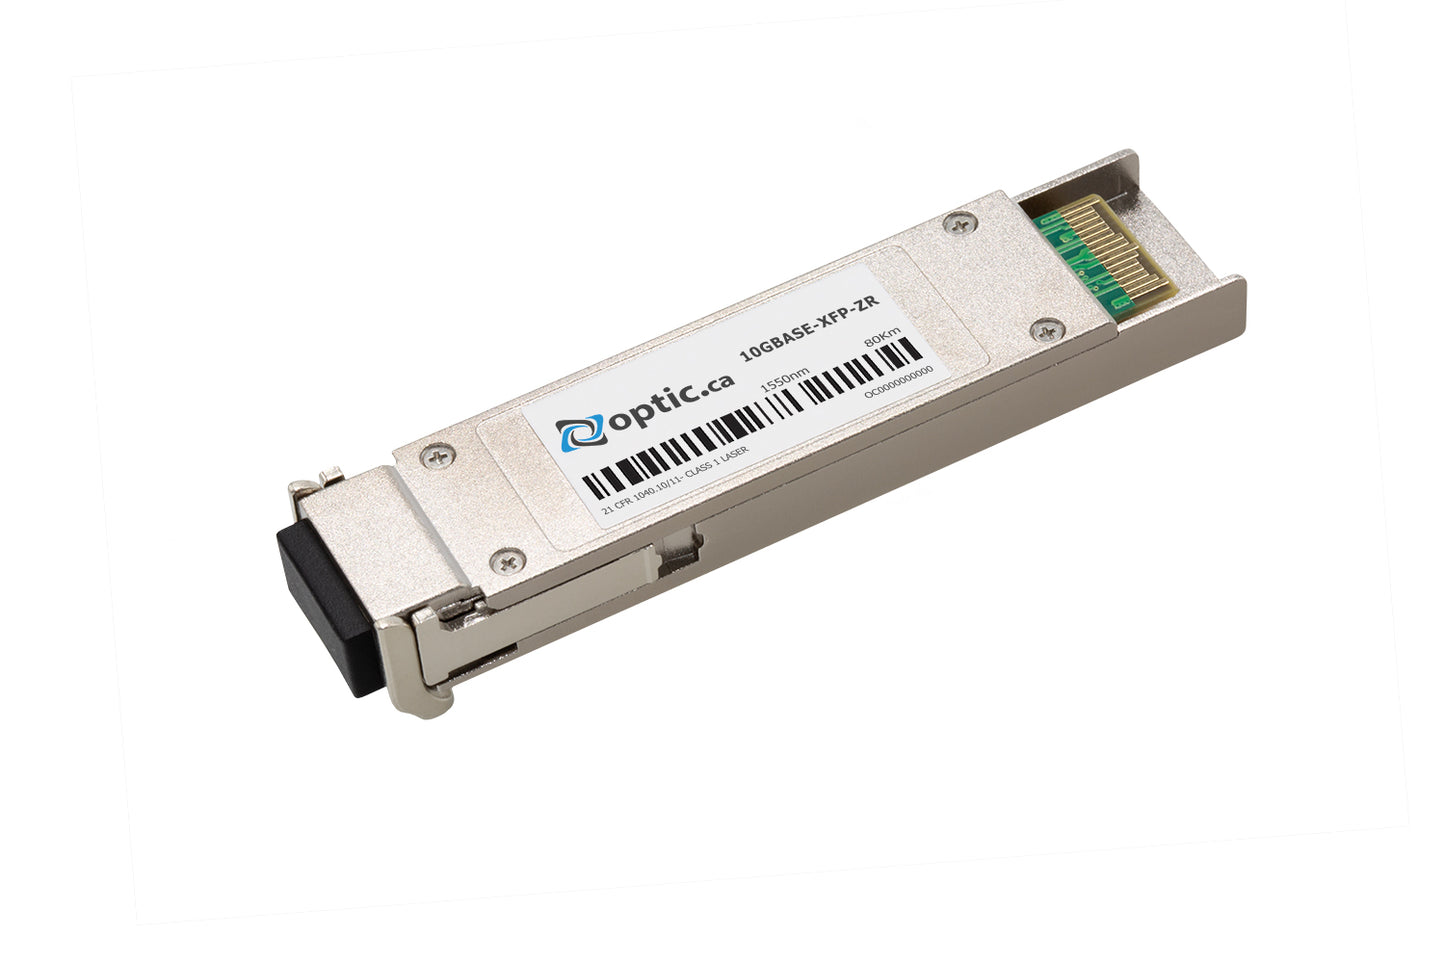 OPTIC.CA - 10GBASE-ZR XFP - GP-XFP-1Z-OC - FORCE10 COMPATIBLE